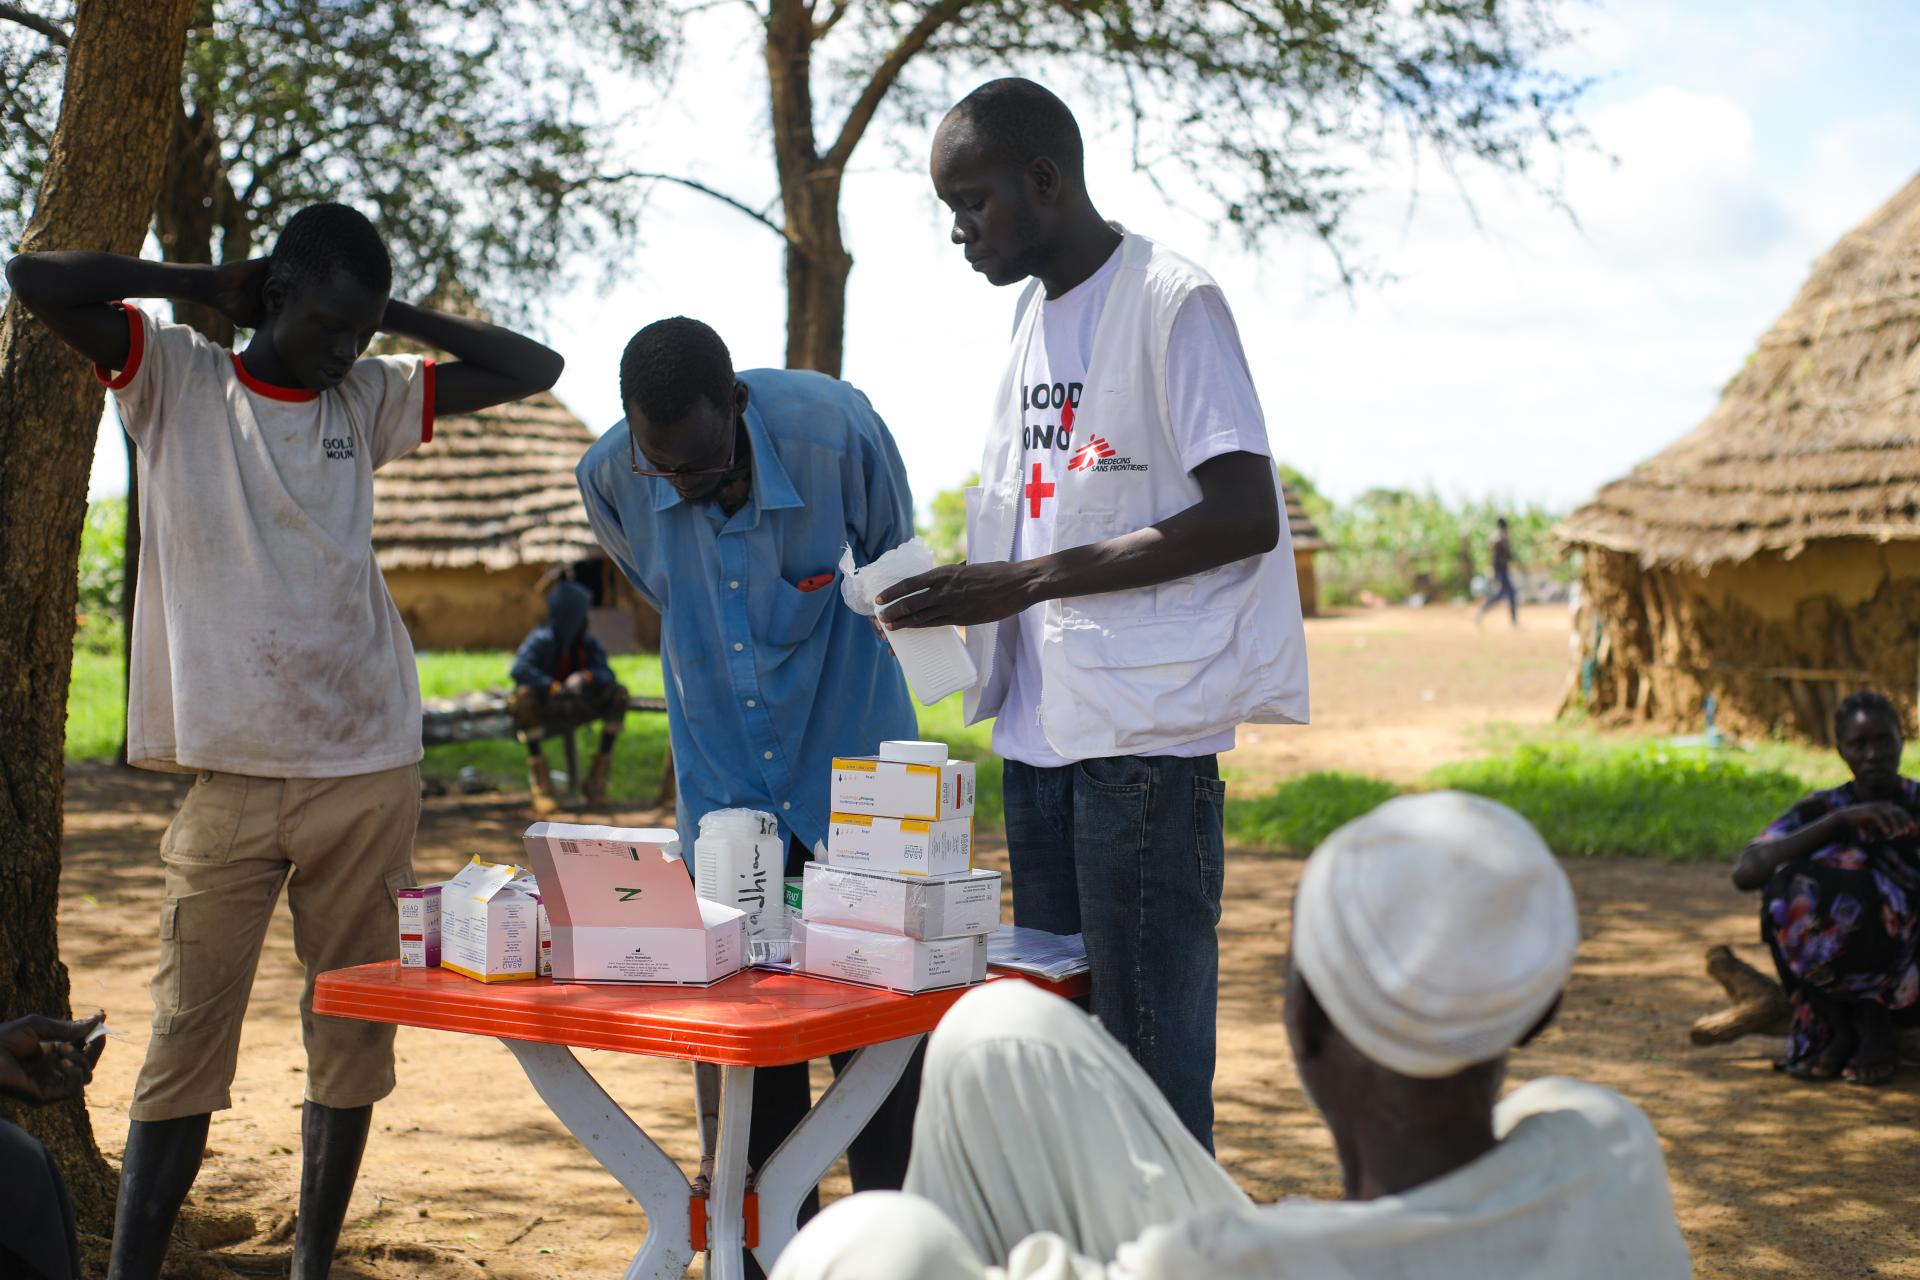 In the remote village of Kadhian in Abyei, an MSF team has established an ICCM site under a tree to provide healthcare services to the communities.